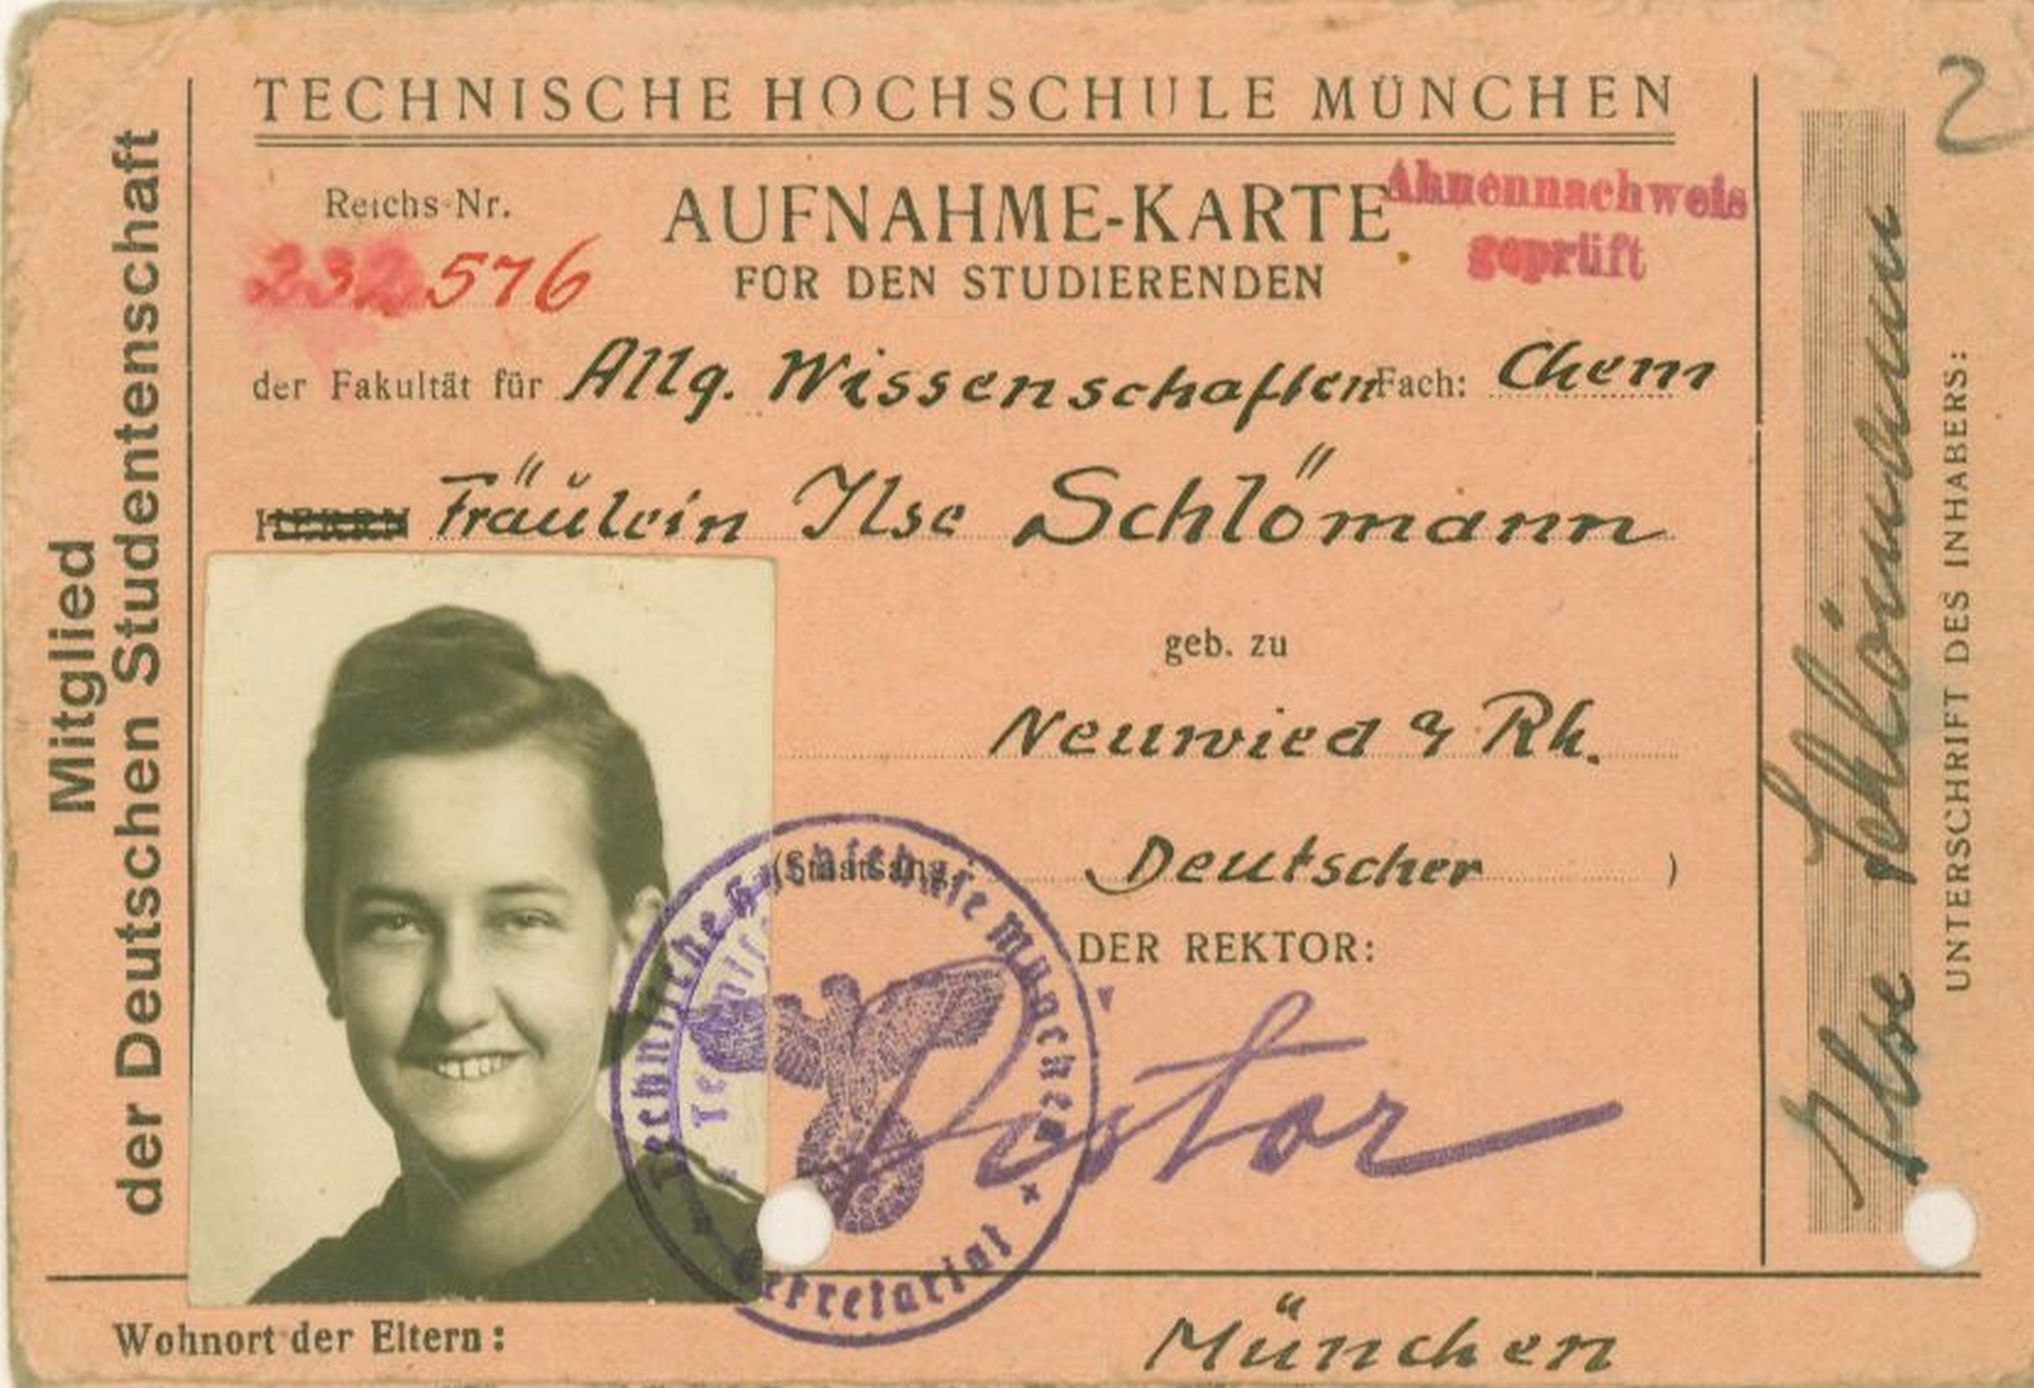 Ilse Schlömann's admission card for chemistry at the Technical University of Munich